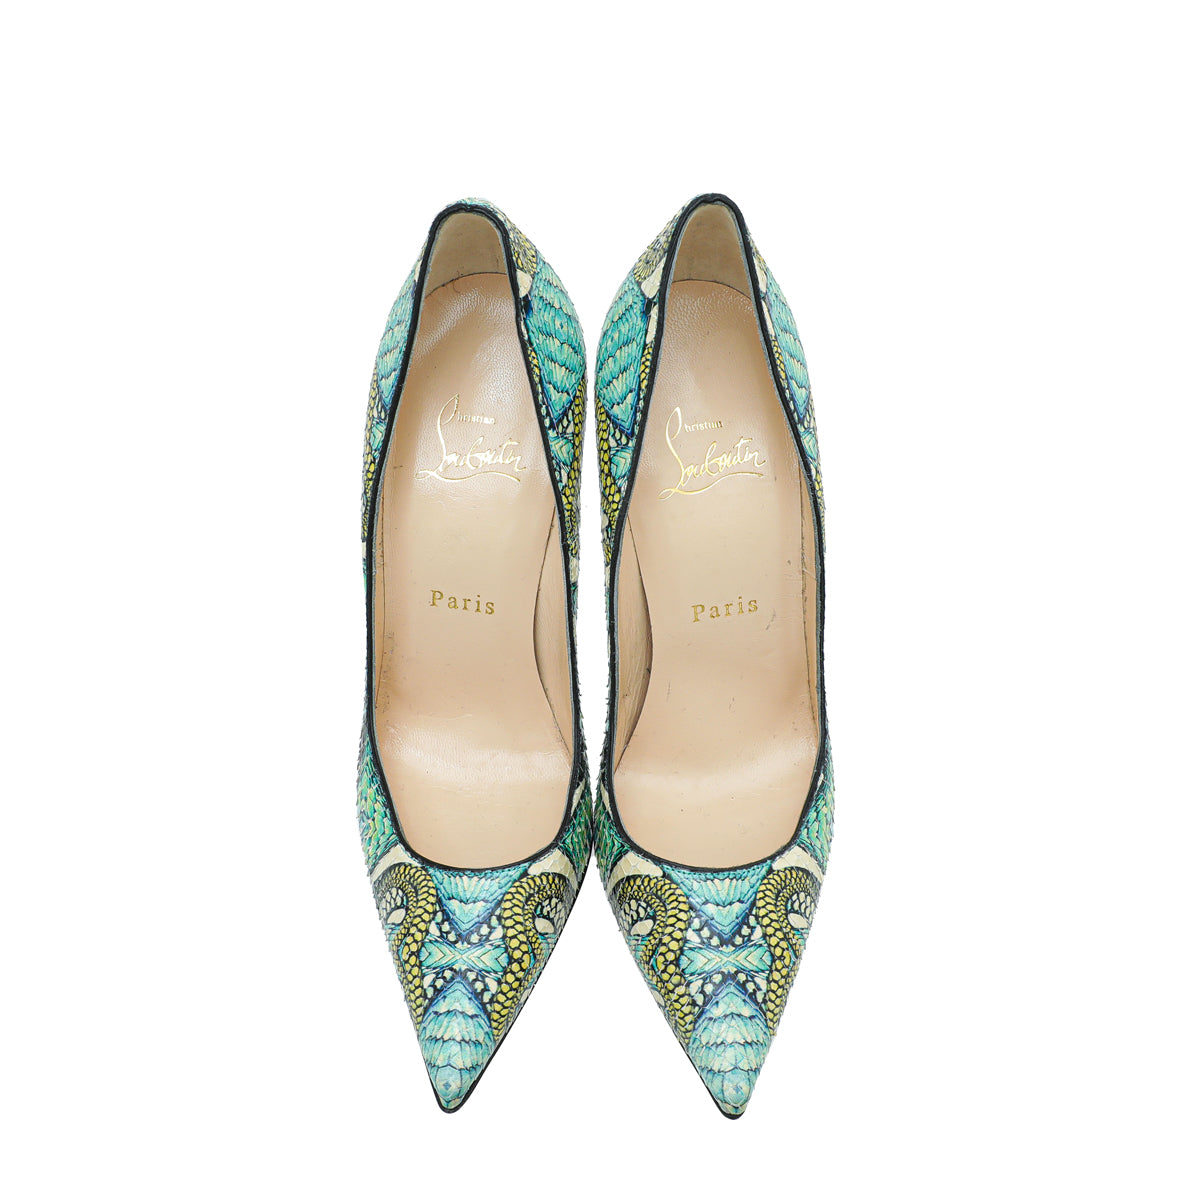 Christian Louboutin Green Multicolor Printed Python Inferno So Kate Pumps 37